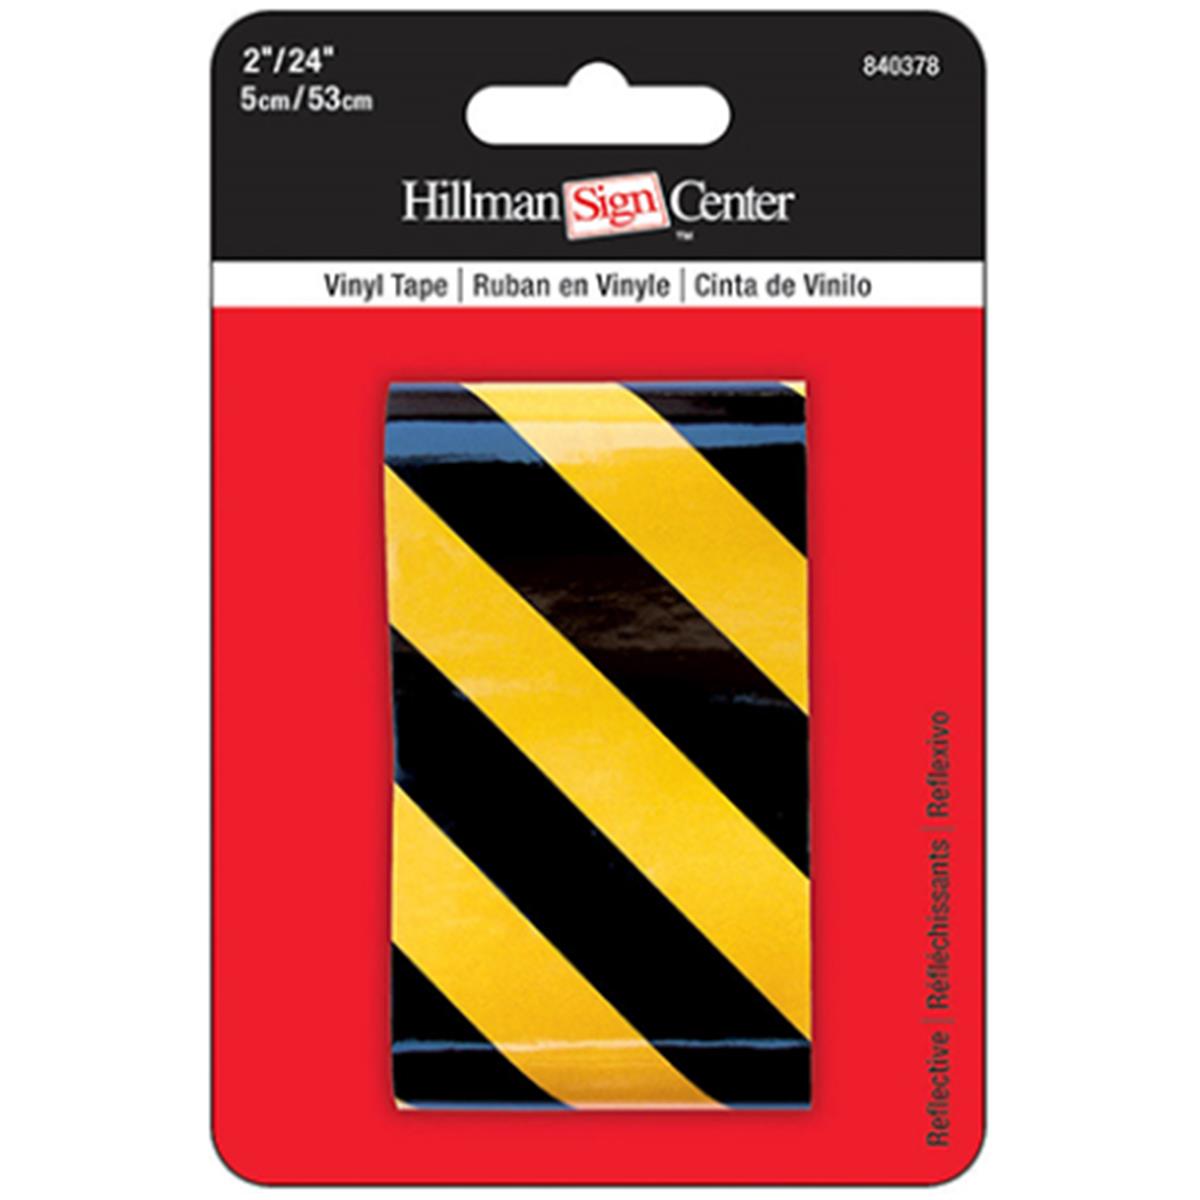 840378 2 X 24 Reflective Safety Tape, Yellow & Black - Pack Of 5